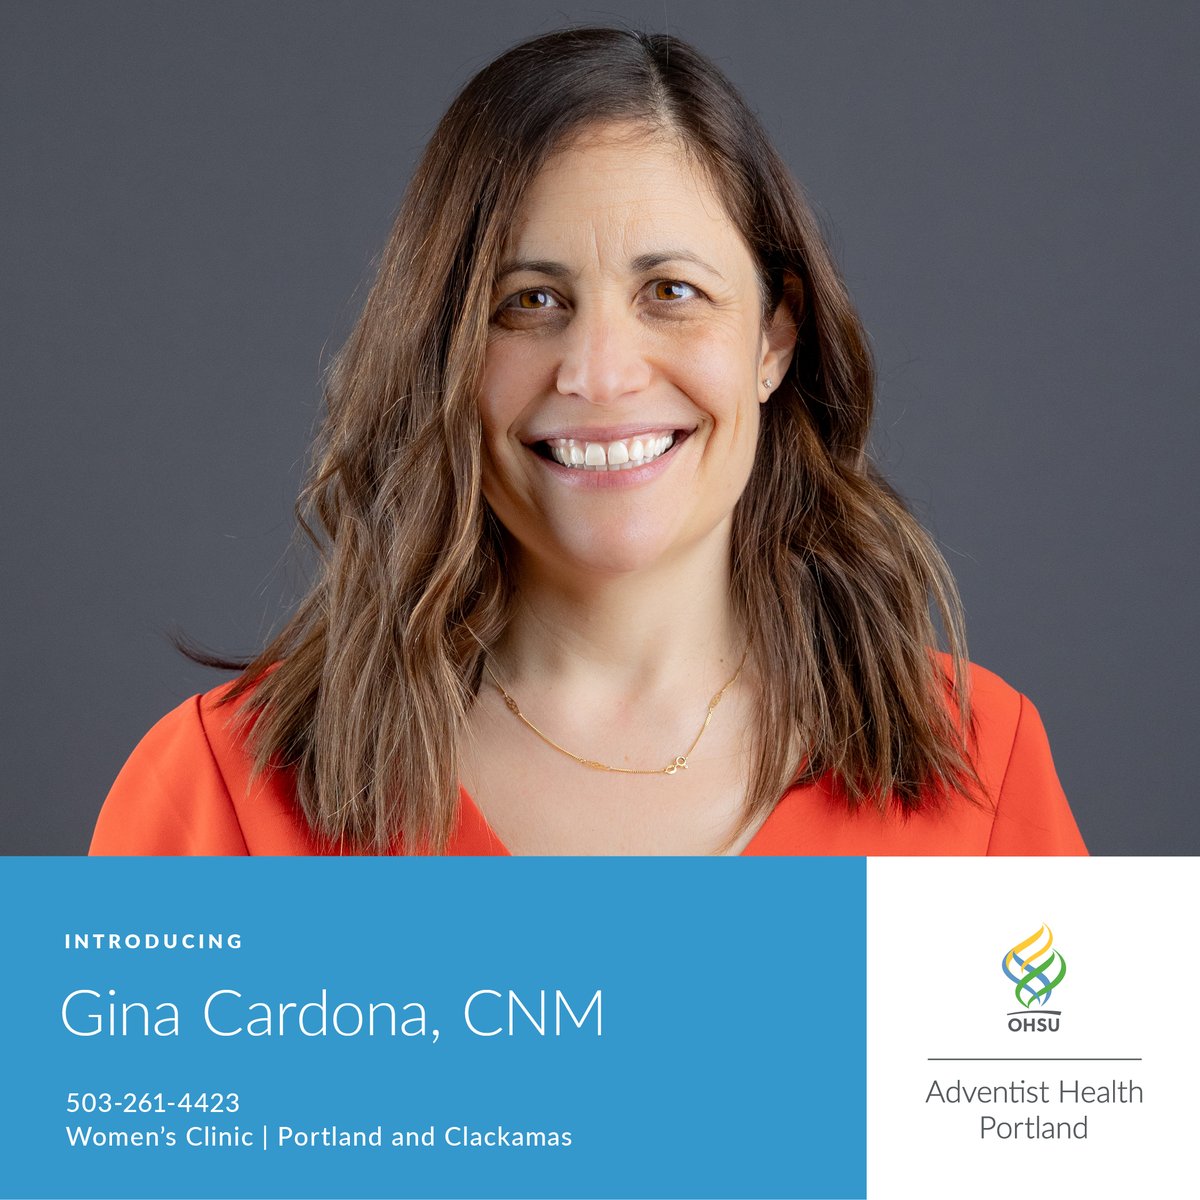 Certified nurse midwife Gina Cardona, CNM, brings a genuine and experienced style of care to her patients. She considers it an honor and a privilege to “care for women and families during a very intimate and vulnerable time in their life.” spr.ly/6010ZFqG4